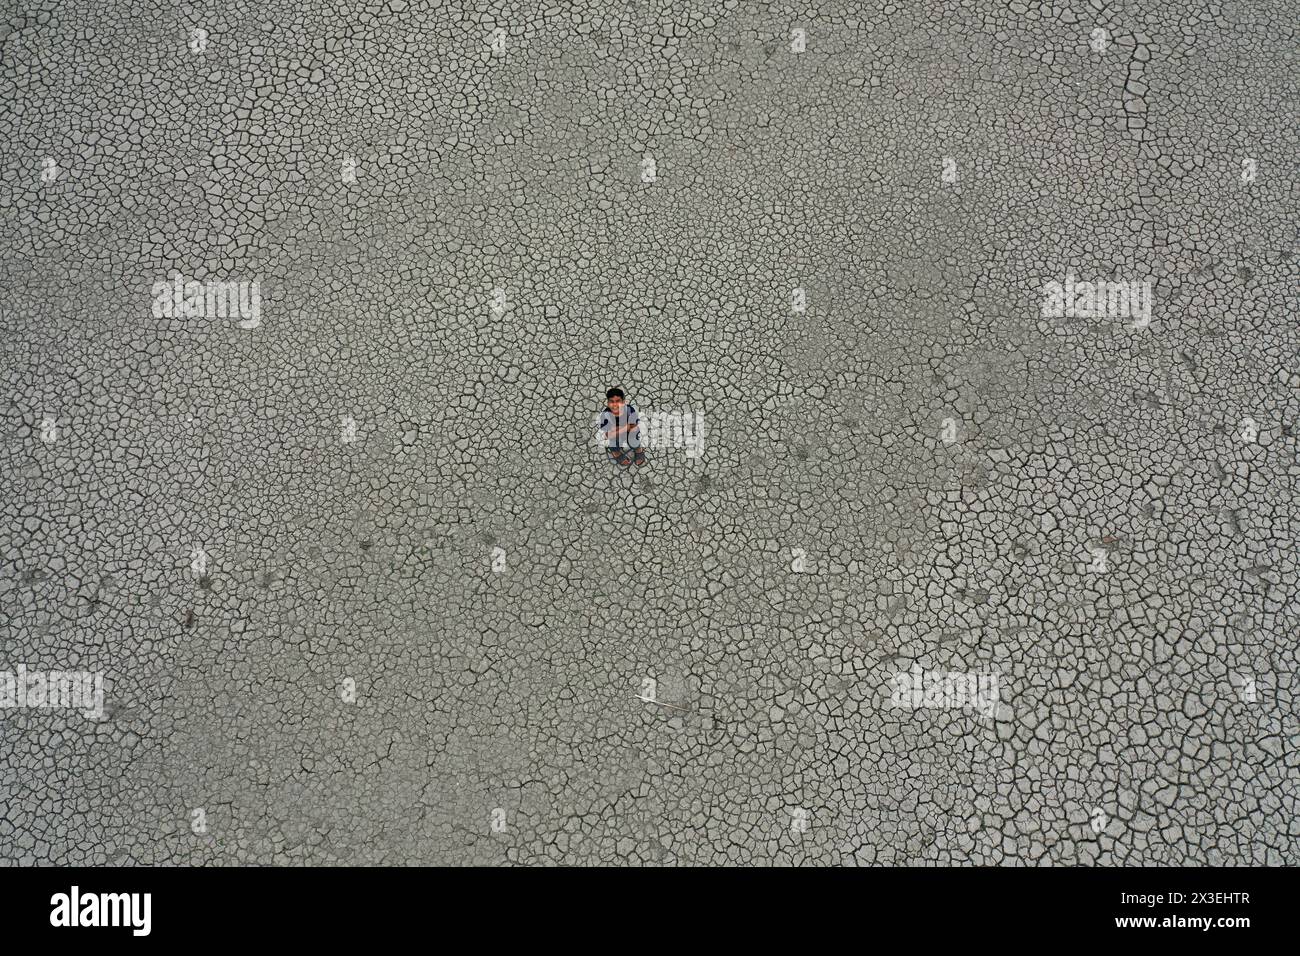 Khulna, Bangladesh - April 11, 2024: The intense heat of summer, the water has dried up and the soil has burst in the coastal region of Khulna distric Stock Photo